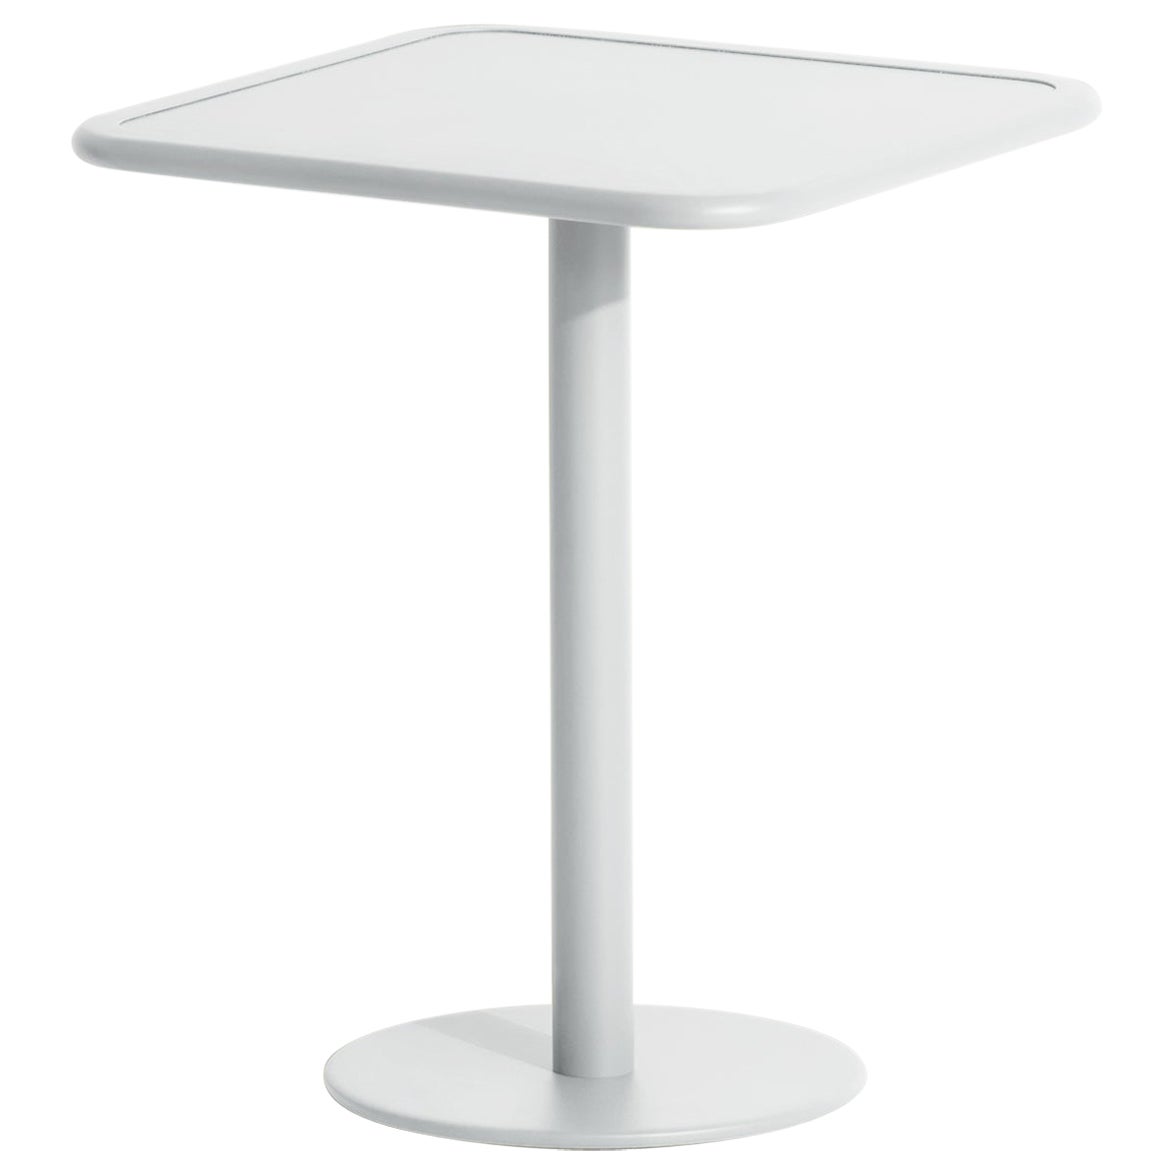 Petite Friture Week-End Bistro Square Dining Table in Pearl Grey Aluminium, 2017